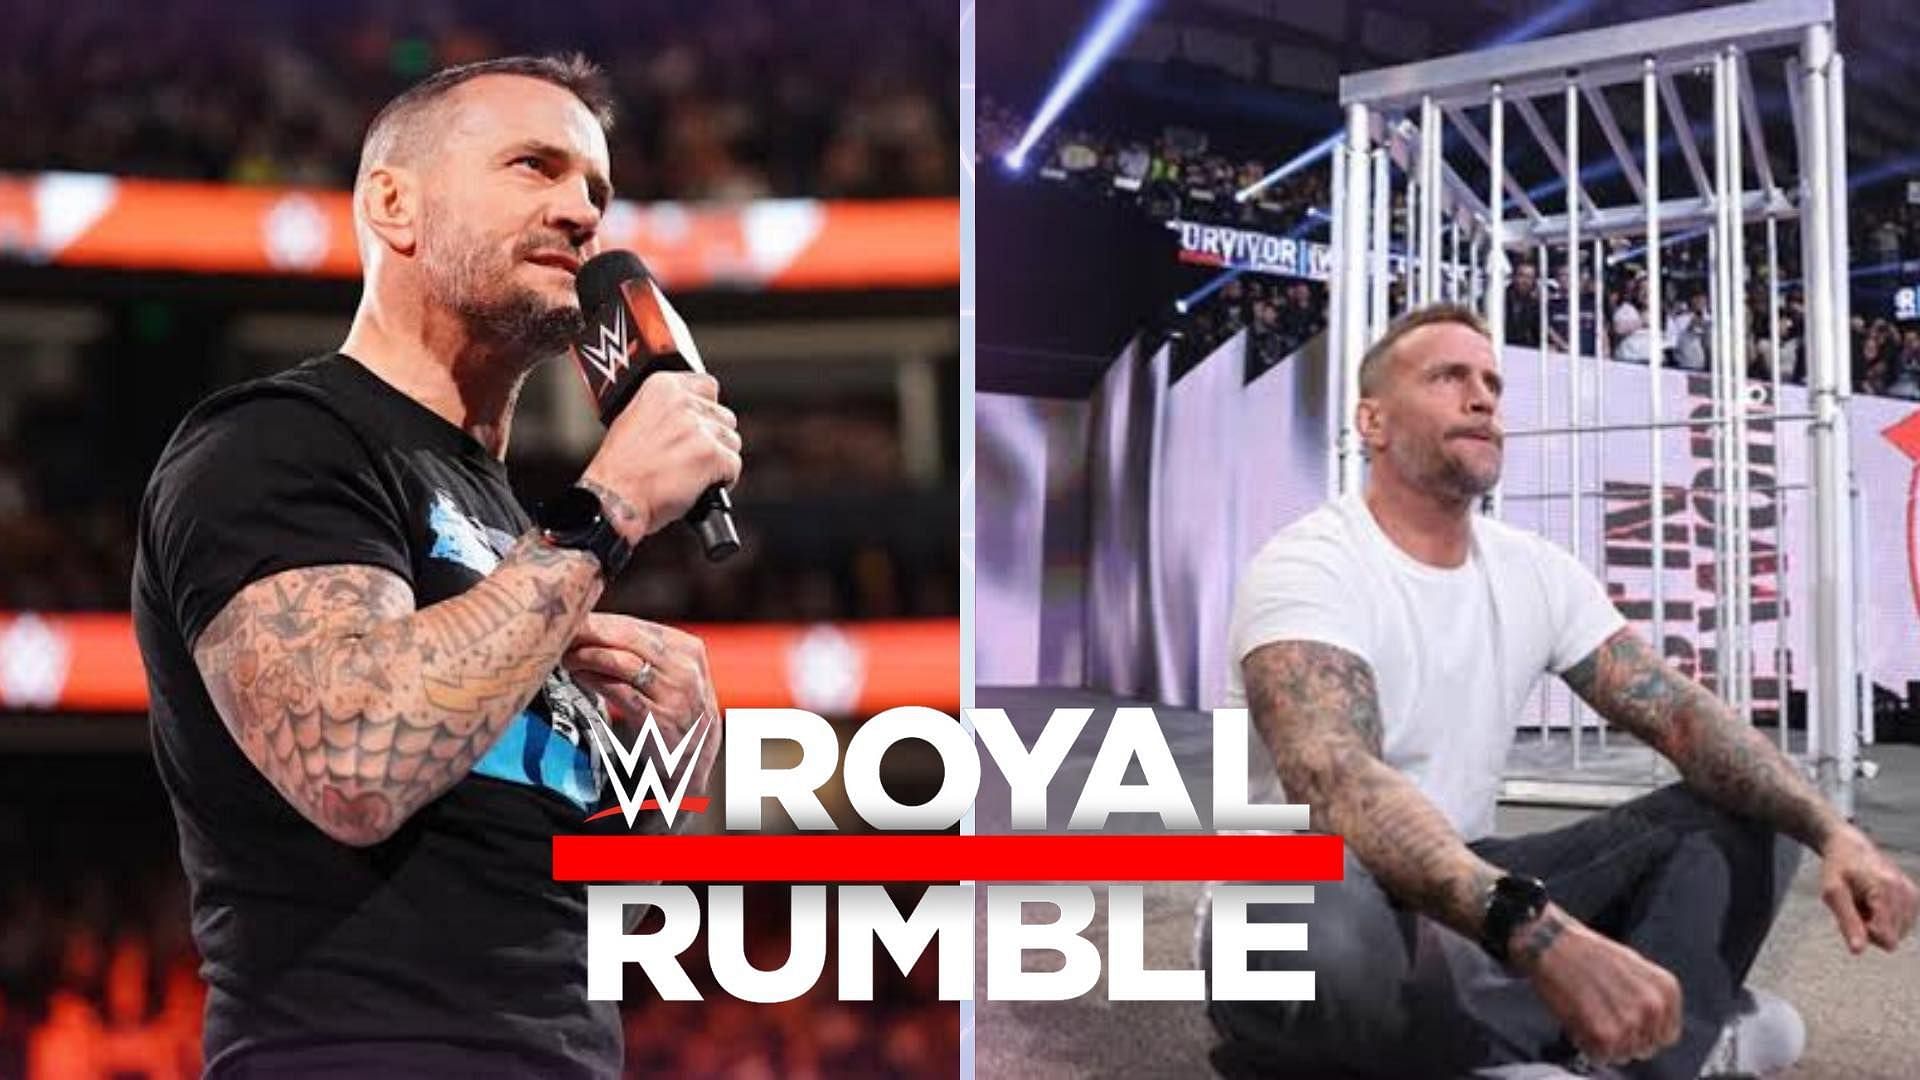 The WWE landscape shifted with the arrival of CM Punk.